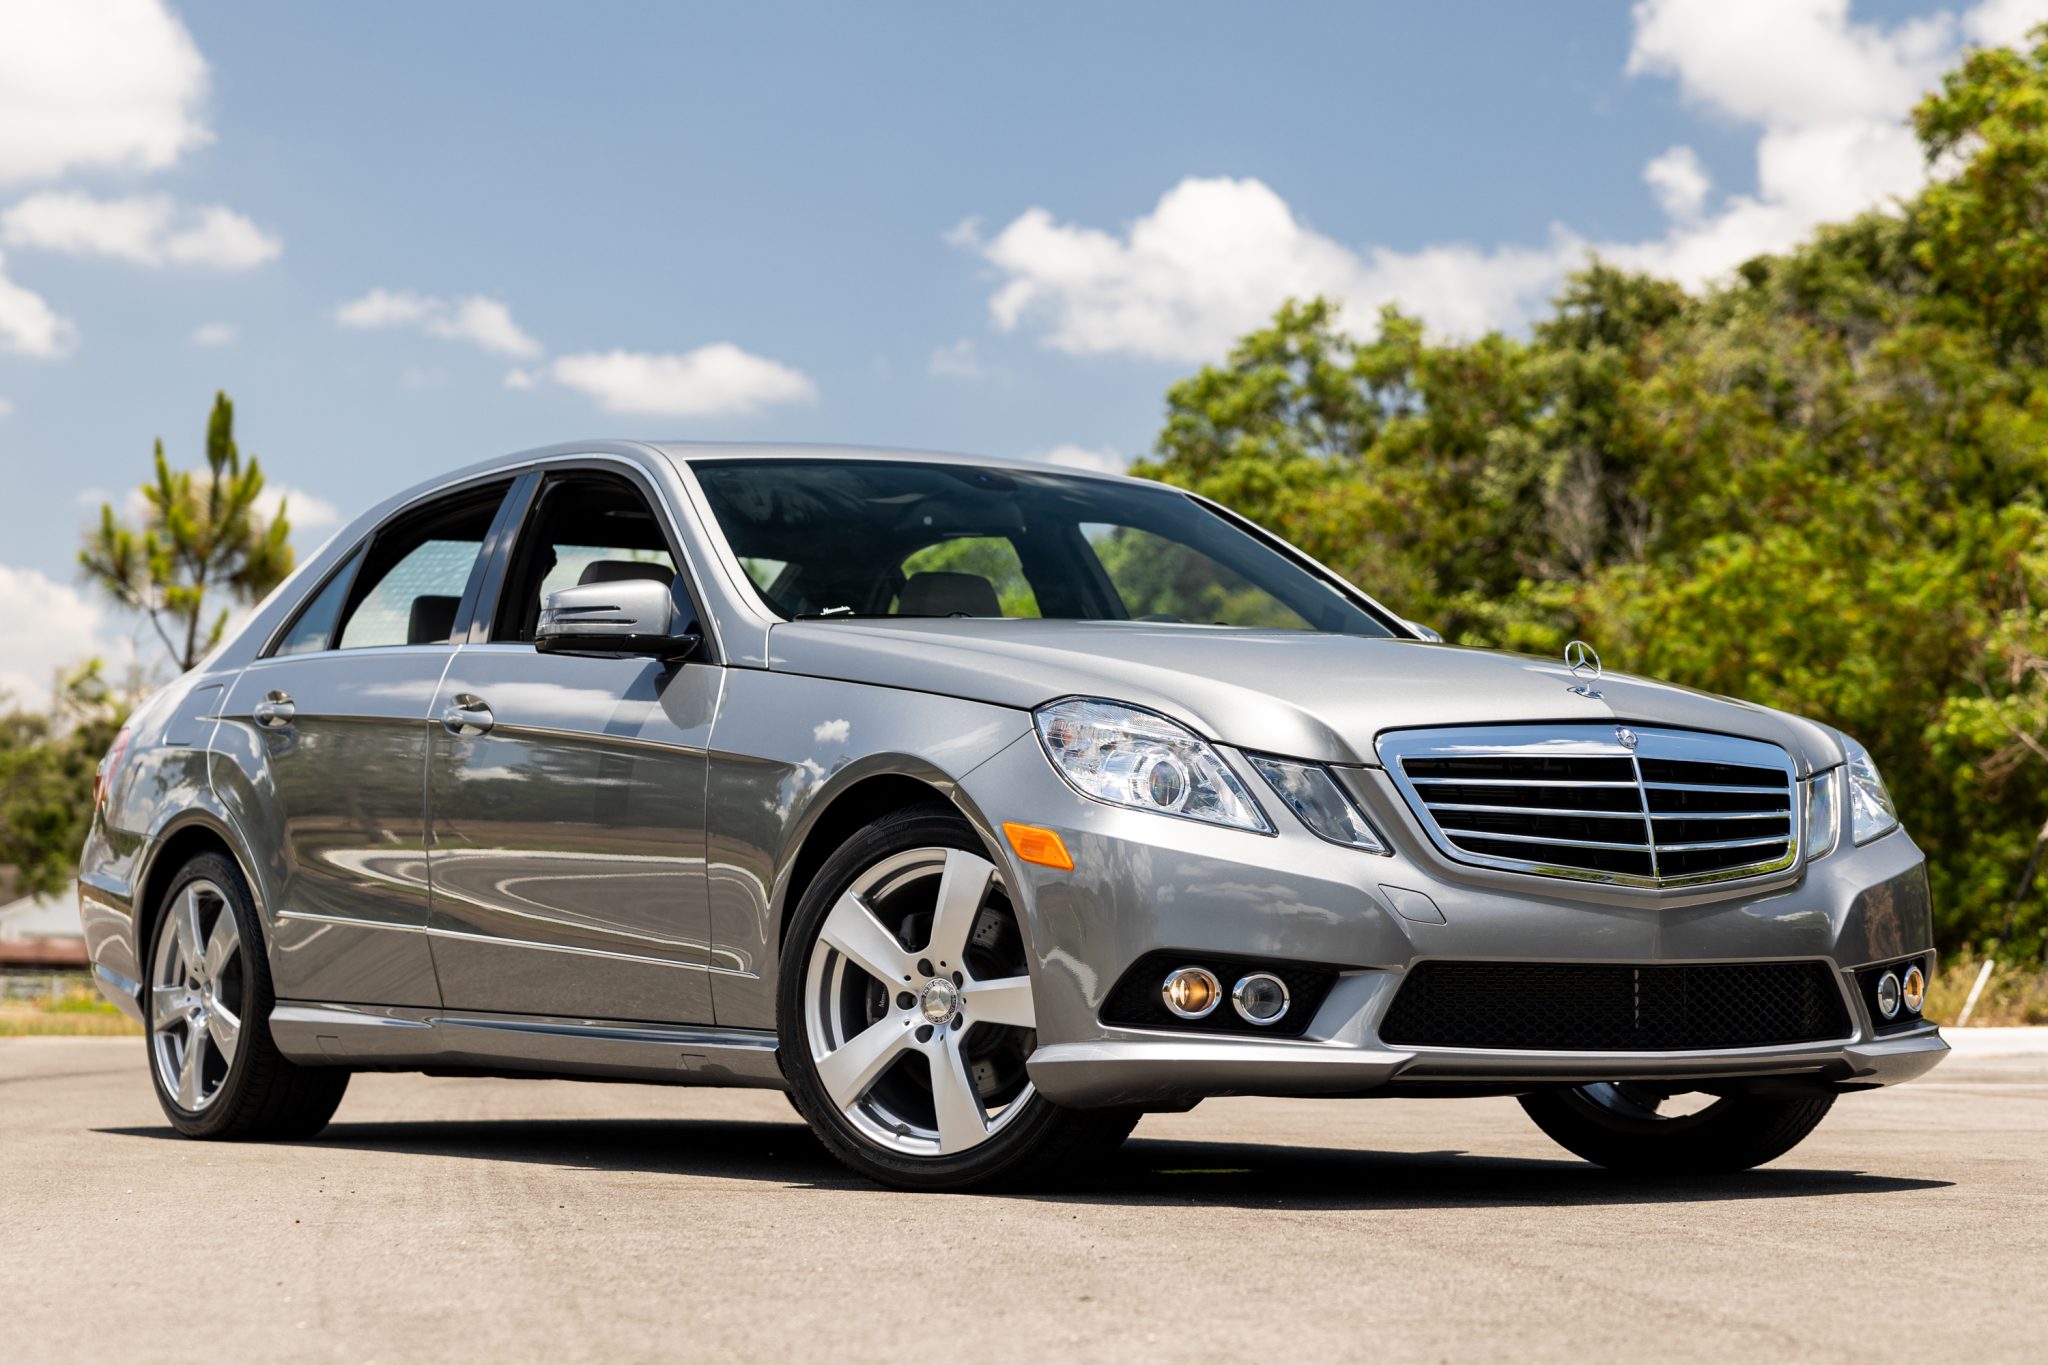 Used 3,100-Mile 2010 Mercedes-Benz E350 Sedan Review